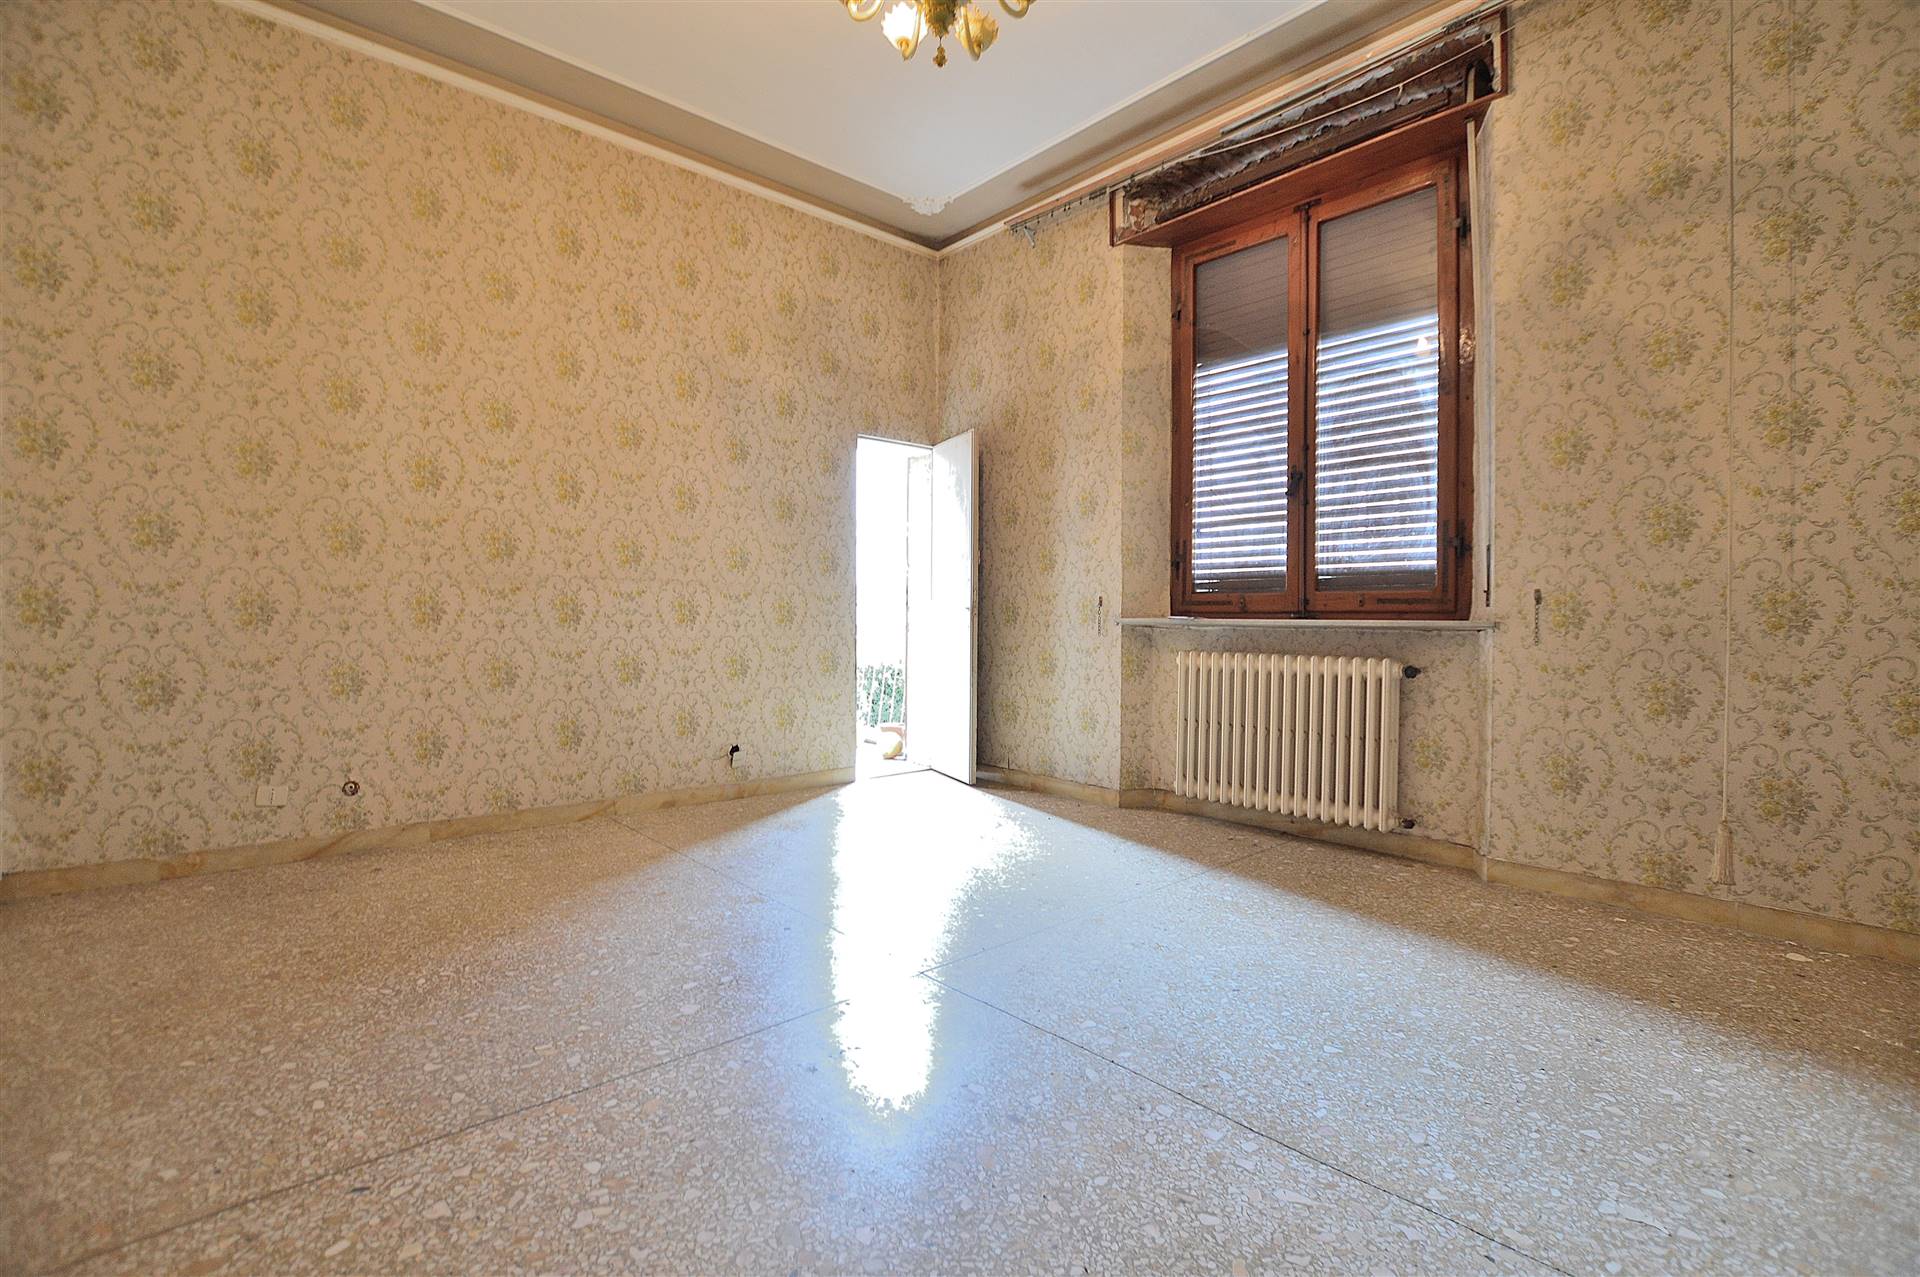 SAN PROSPERO, SIENA, Apartment for sale of 135 Sq. mt., Be restored, Heating Individual heating system, Energetic class: G, Epi: 175 kwh/m2 year, placed at 1° on 3, composed by: 6 Rooms, Separate 